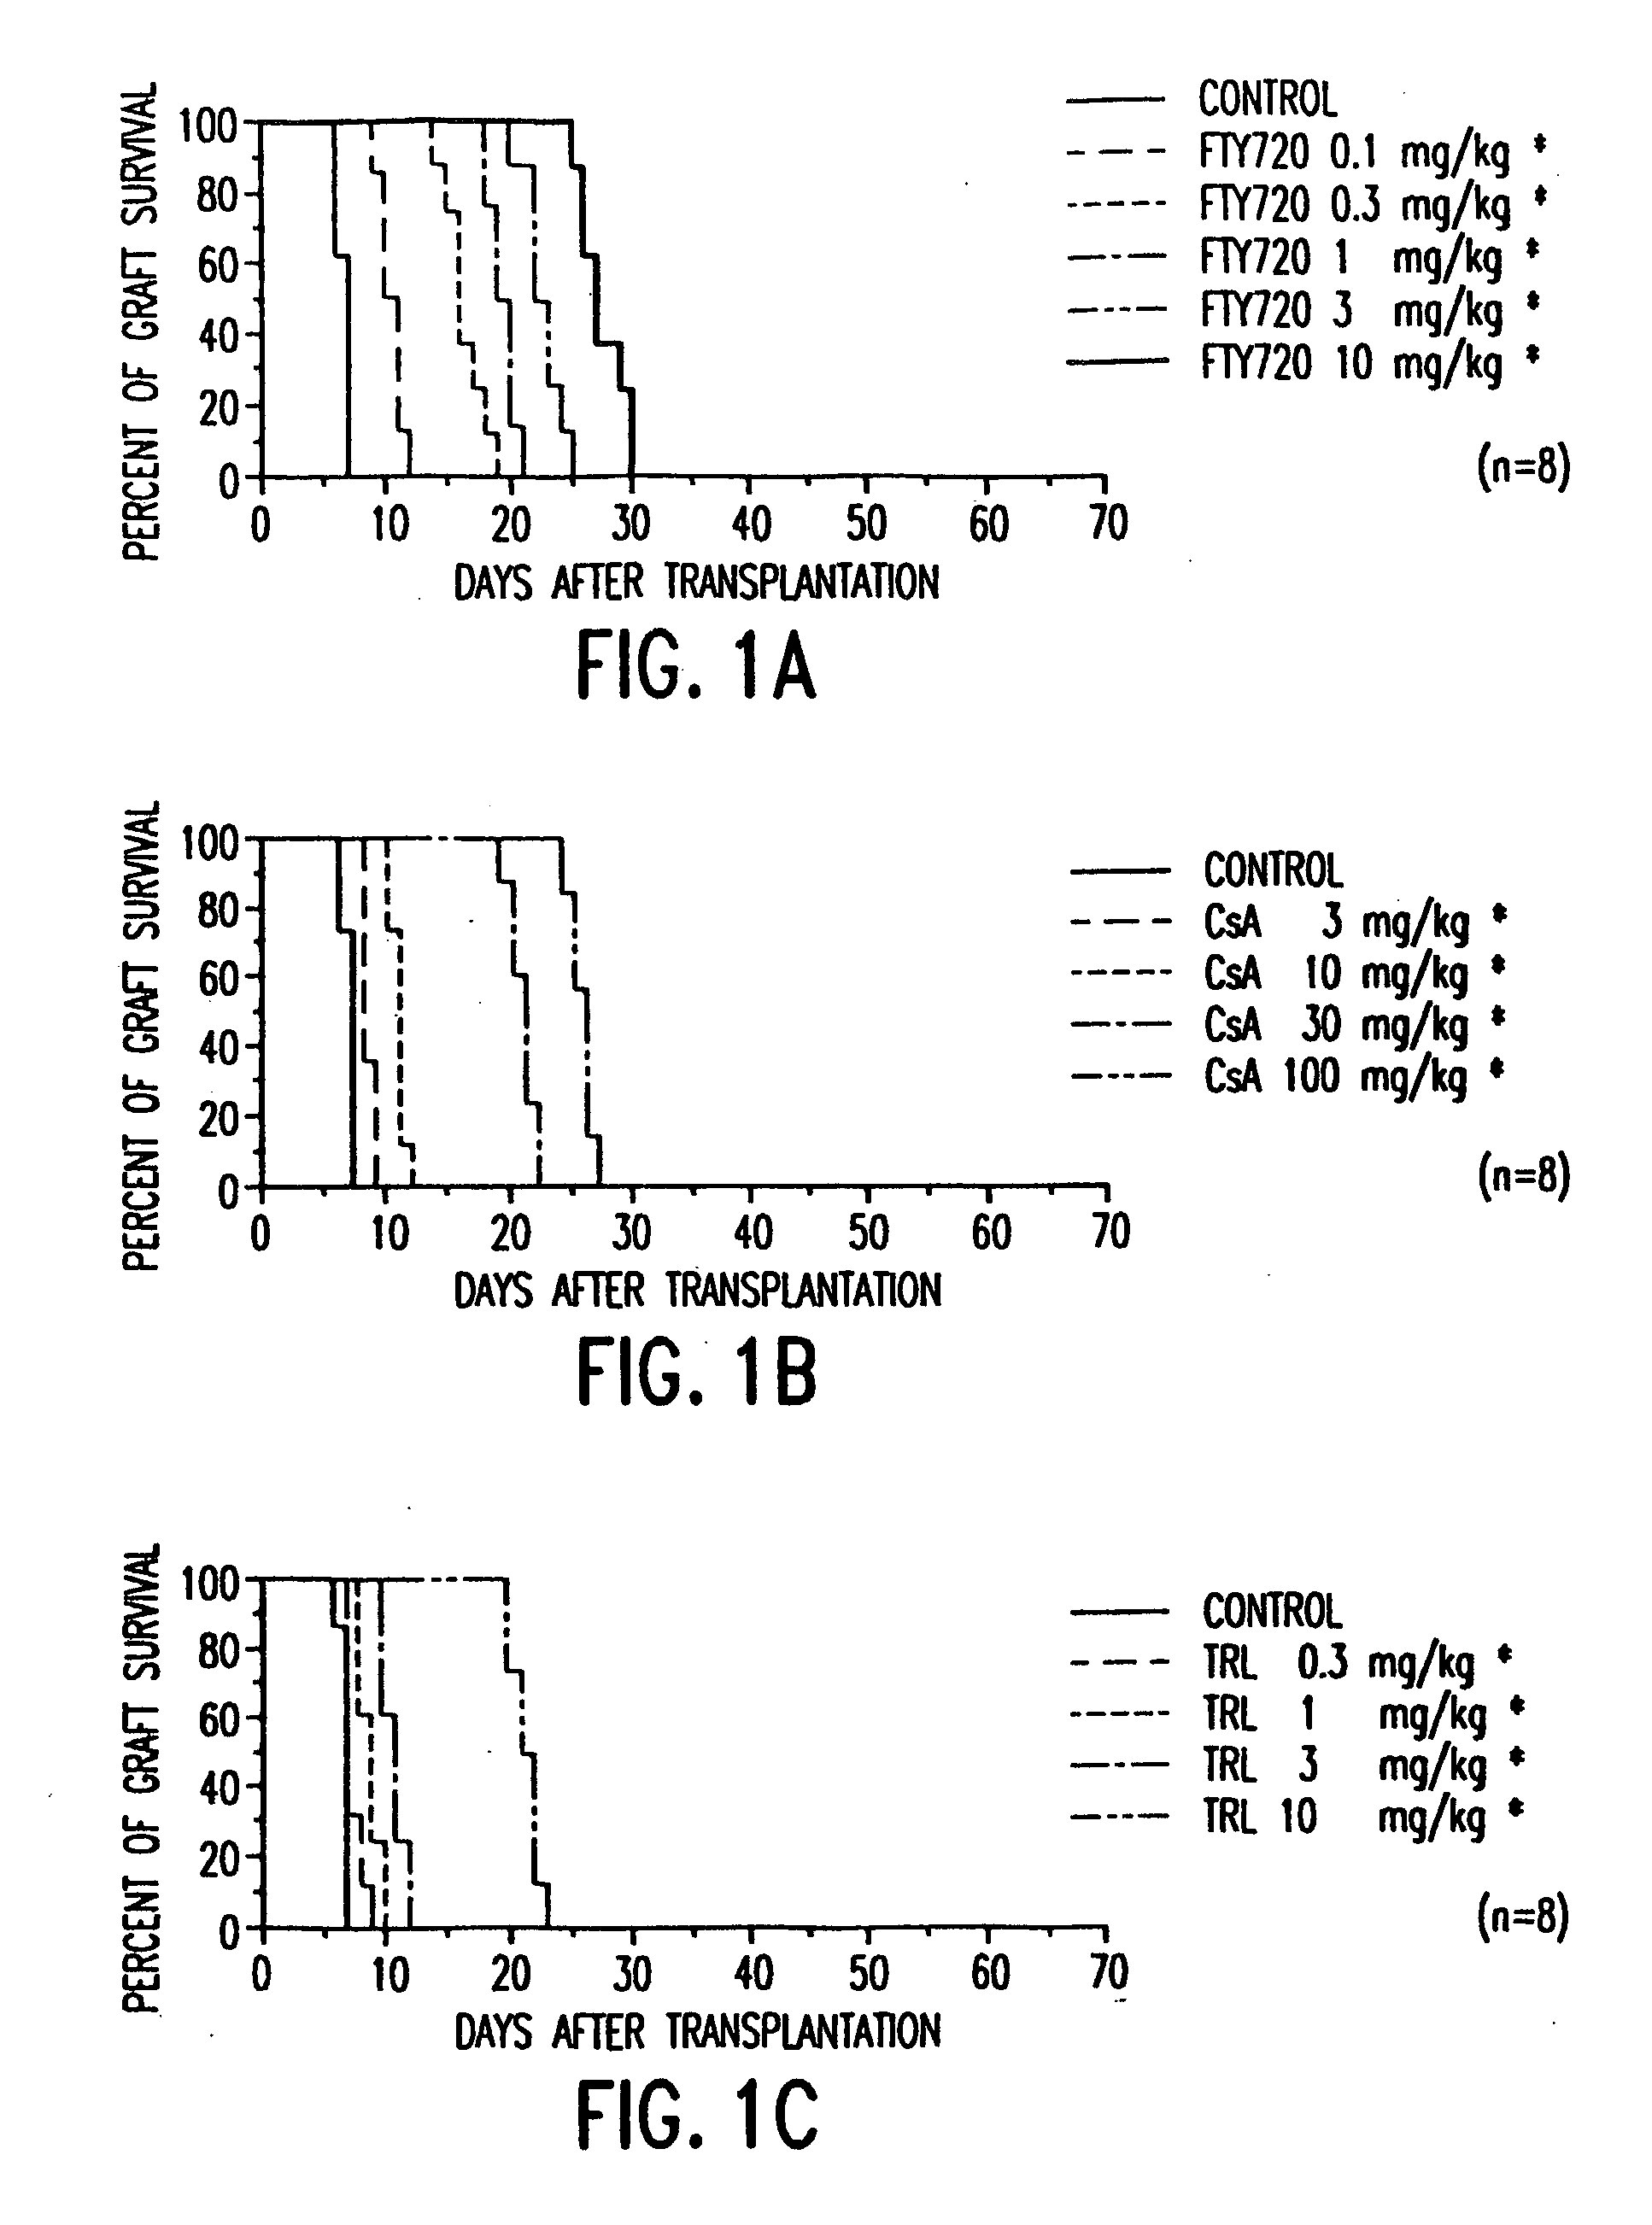 Compositions and methods of using compositions with accelerated lymphocyte homing immunosuppressive properties